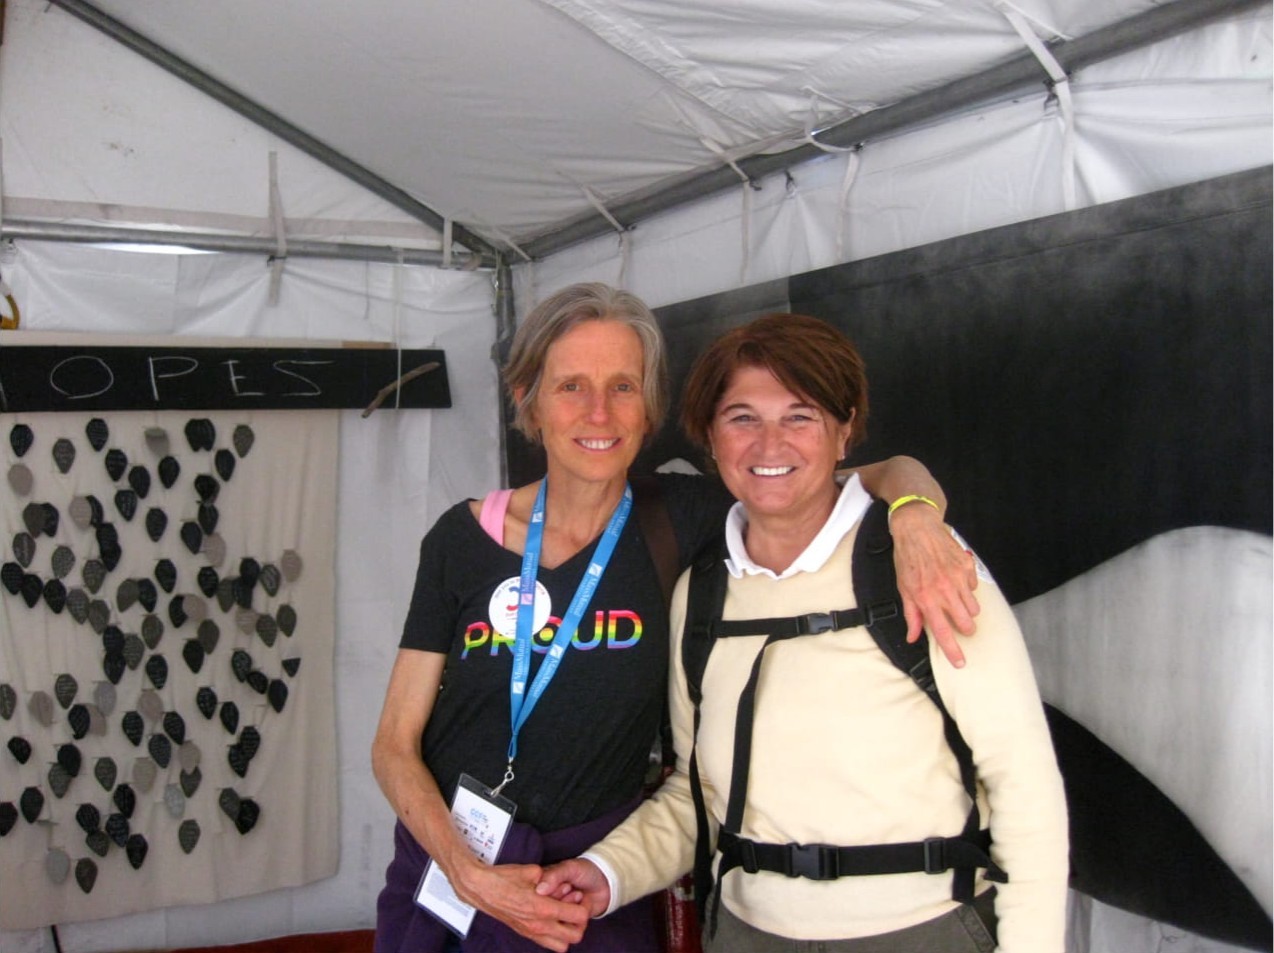 Mary O’Connor and Michela Griffo at the Gay Games in Cleveland and Akron, OH, 2014. Michela shares, “Mary won a gold medal for the U.S.A. in the One Mile Open Water Swim. We are standing in the Peace/Meditation tent which Mary designed for the Games.” Photo courtesy of Michela Griffo.